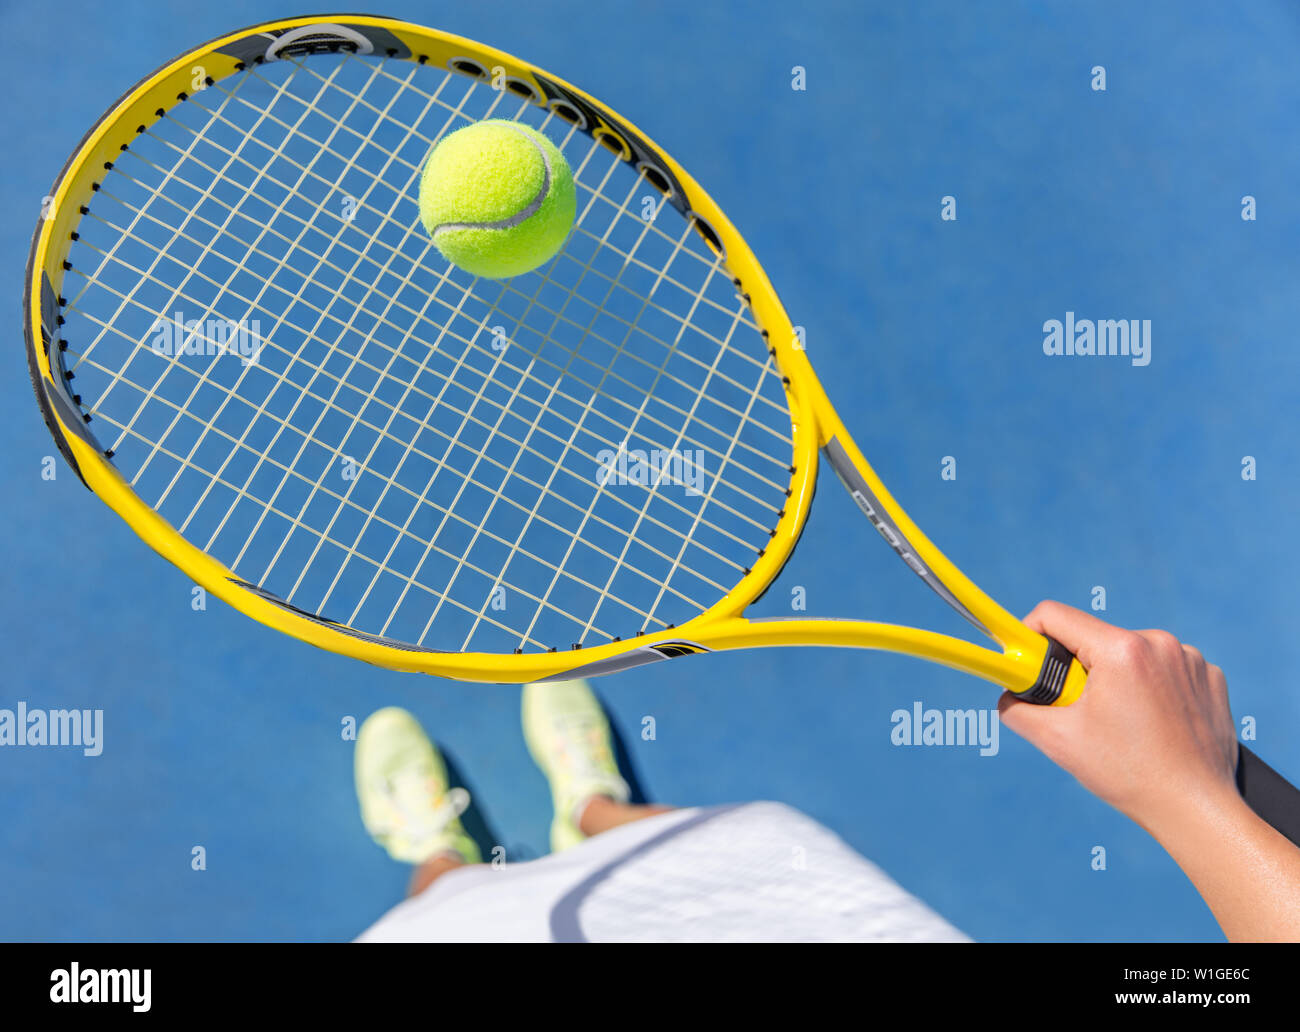 Tennis player holding yellow ball on racket grid. Sports female athlete  taking a feet selfie showing running shoes on blue hard court. POV closeup  of equipment, neon yellow fashion footwear Stock Photo -